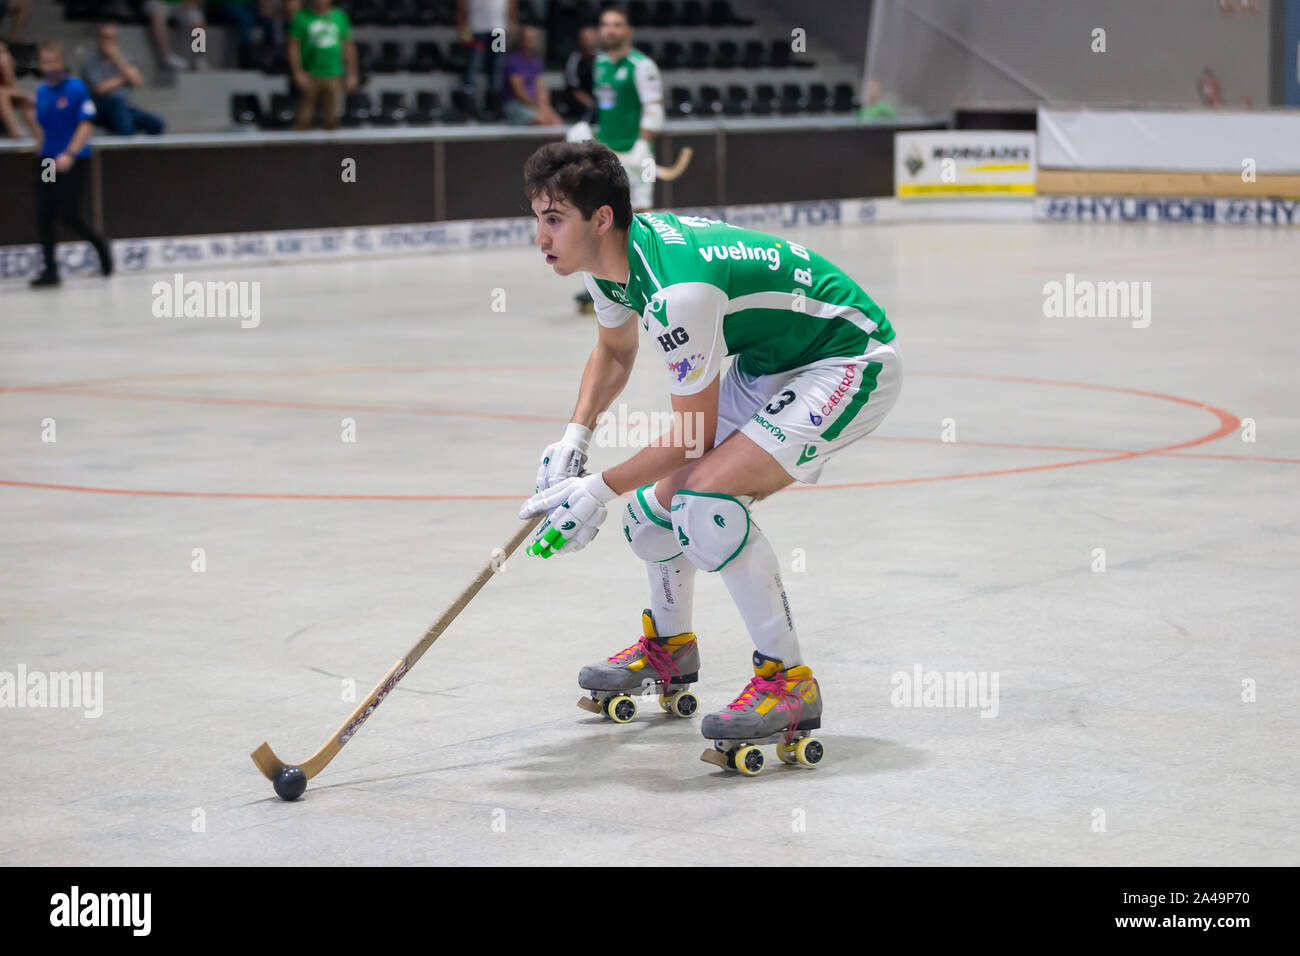 CALAFELL, BARCELONA, SPAIN - OCTOBER, 2019. Spanish OK League match between CP Calafell vs Deportivo Liceo. Bruno Di Benedetto roller hockey player Stock Photo